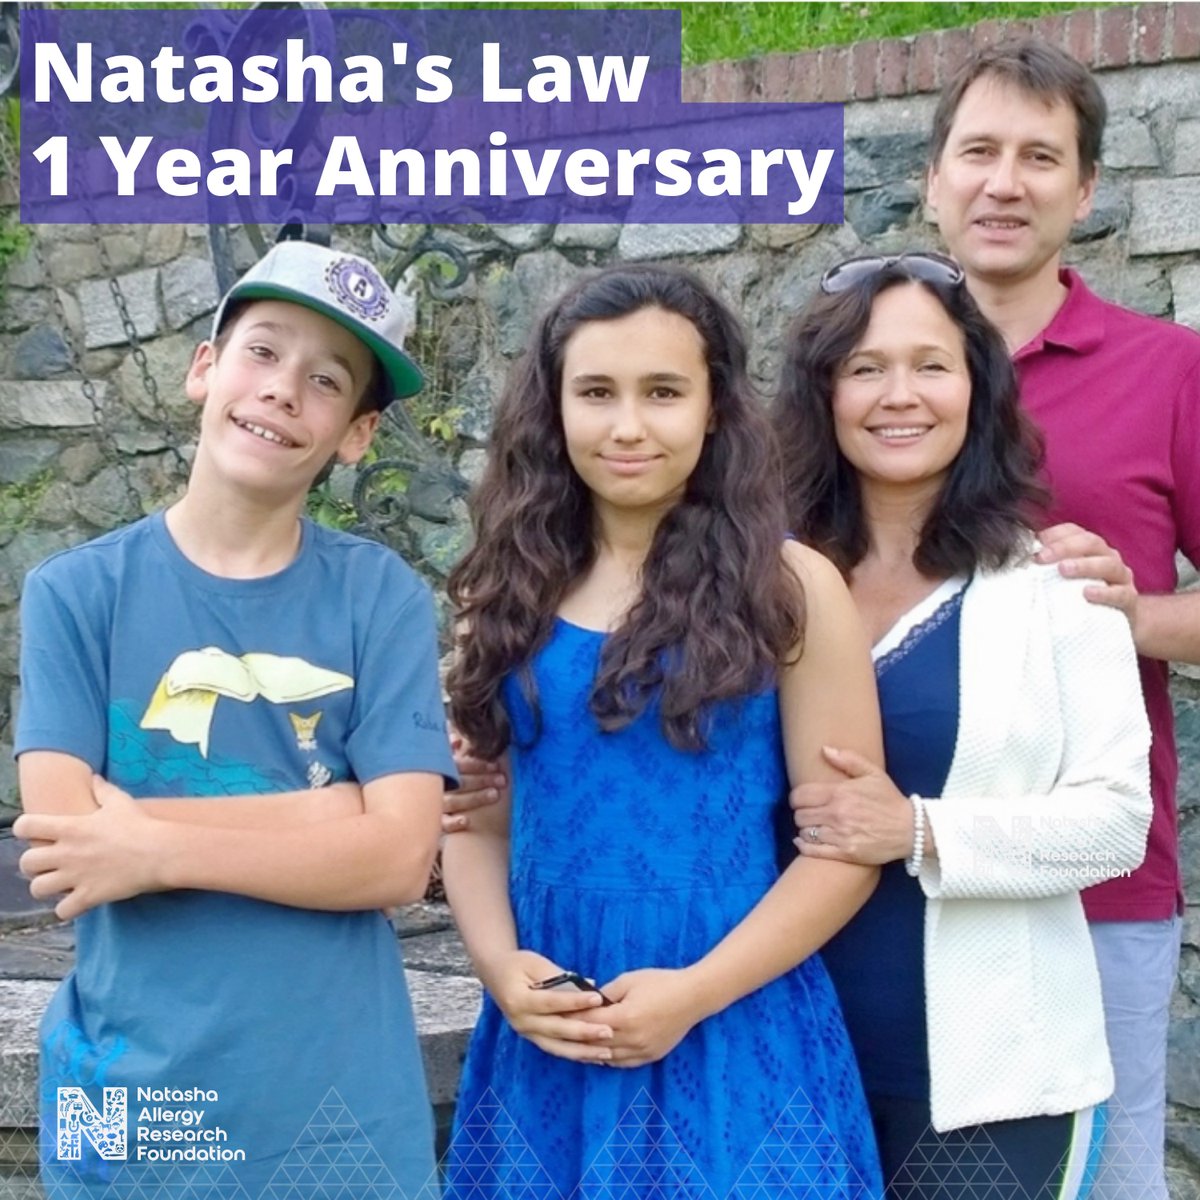 This month marks 1 year since the introduction of the allergen labelling law, also known as Natasha’s Law.

For more information, please check out @NatashasLegacy who continue to do a fantastic work to raise the important issue of allergy awareness.

#PPDS #natashaslaw